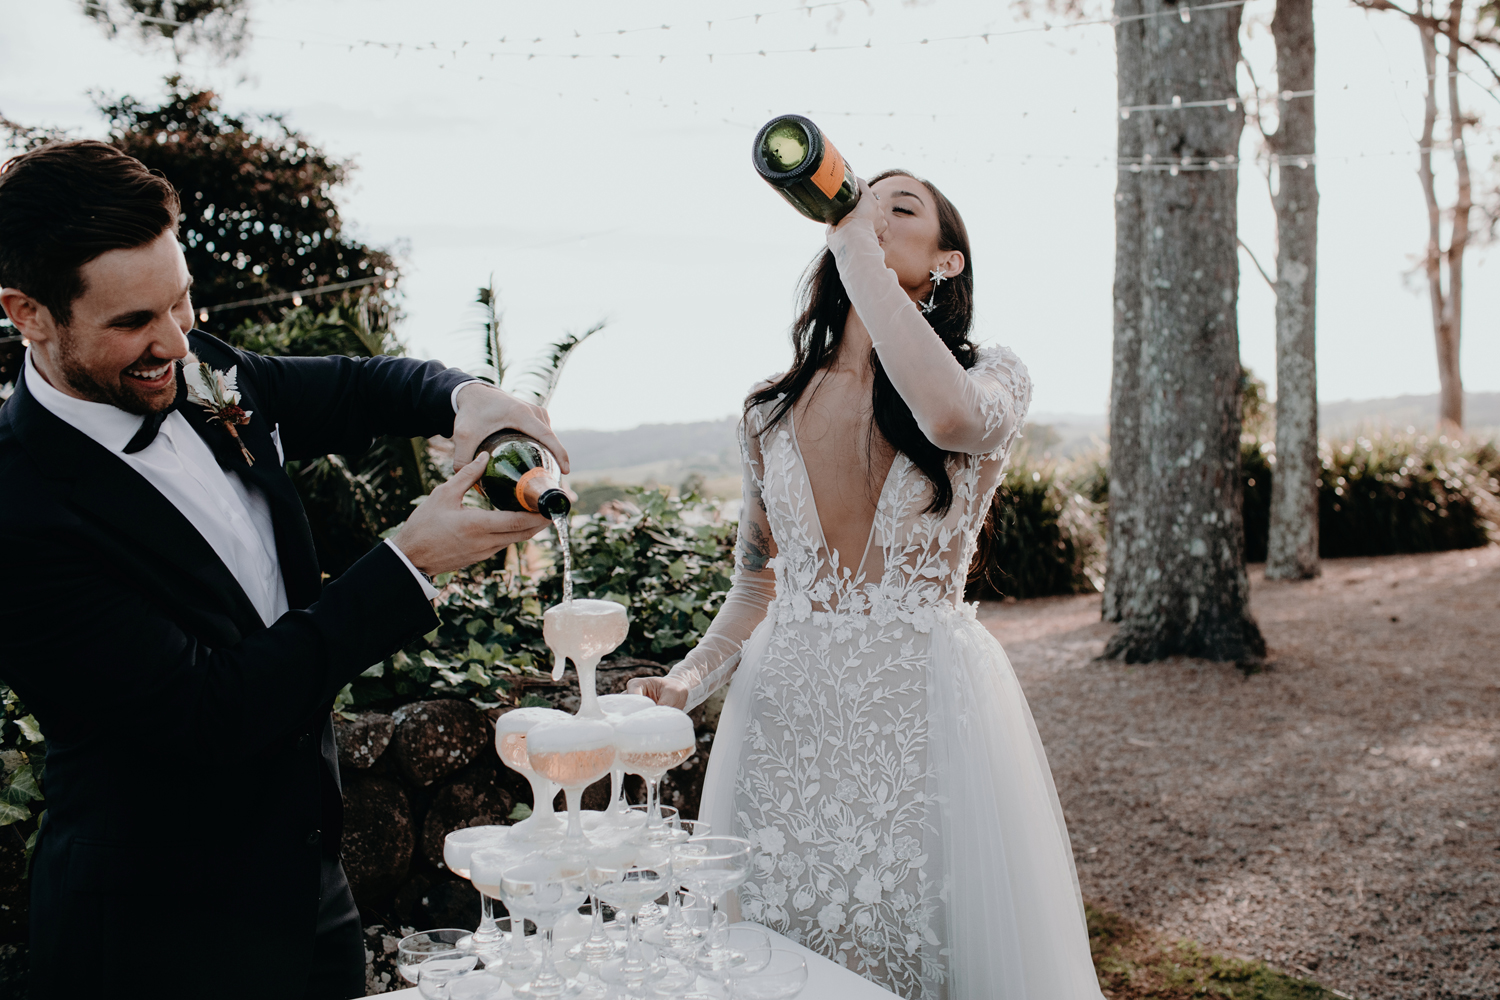 2020 wedding trends - Ivy Road Photography